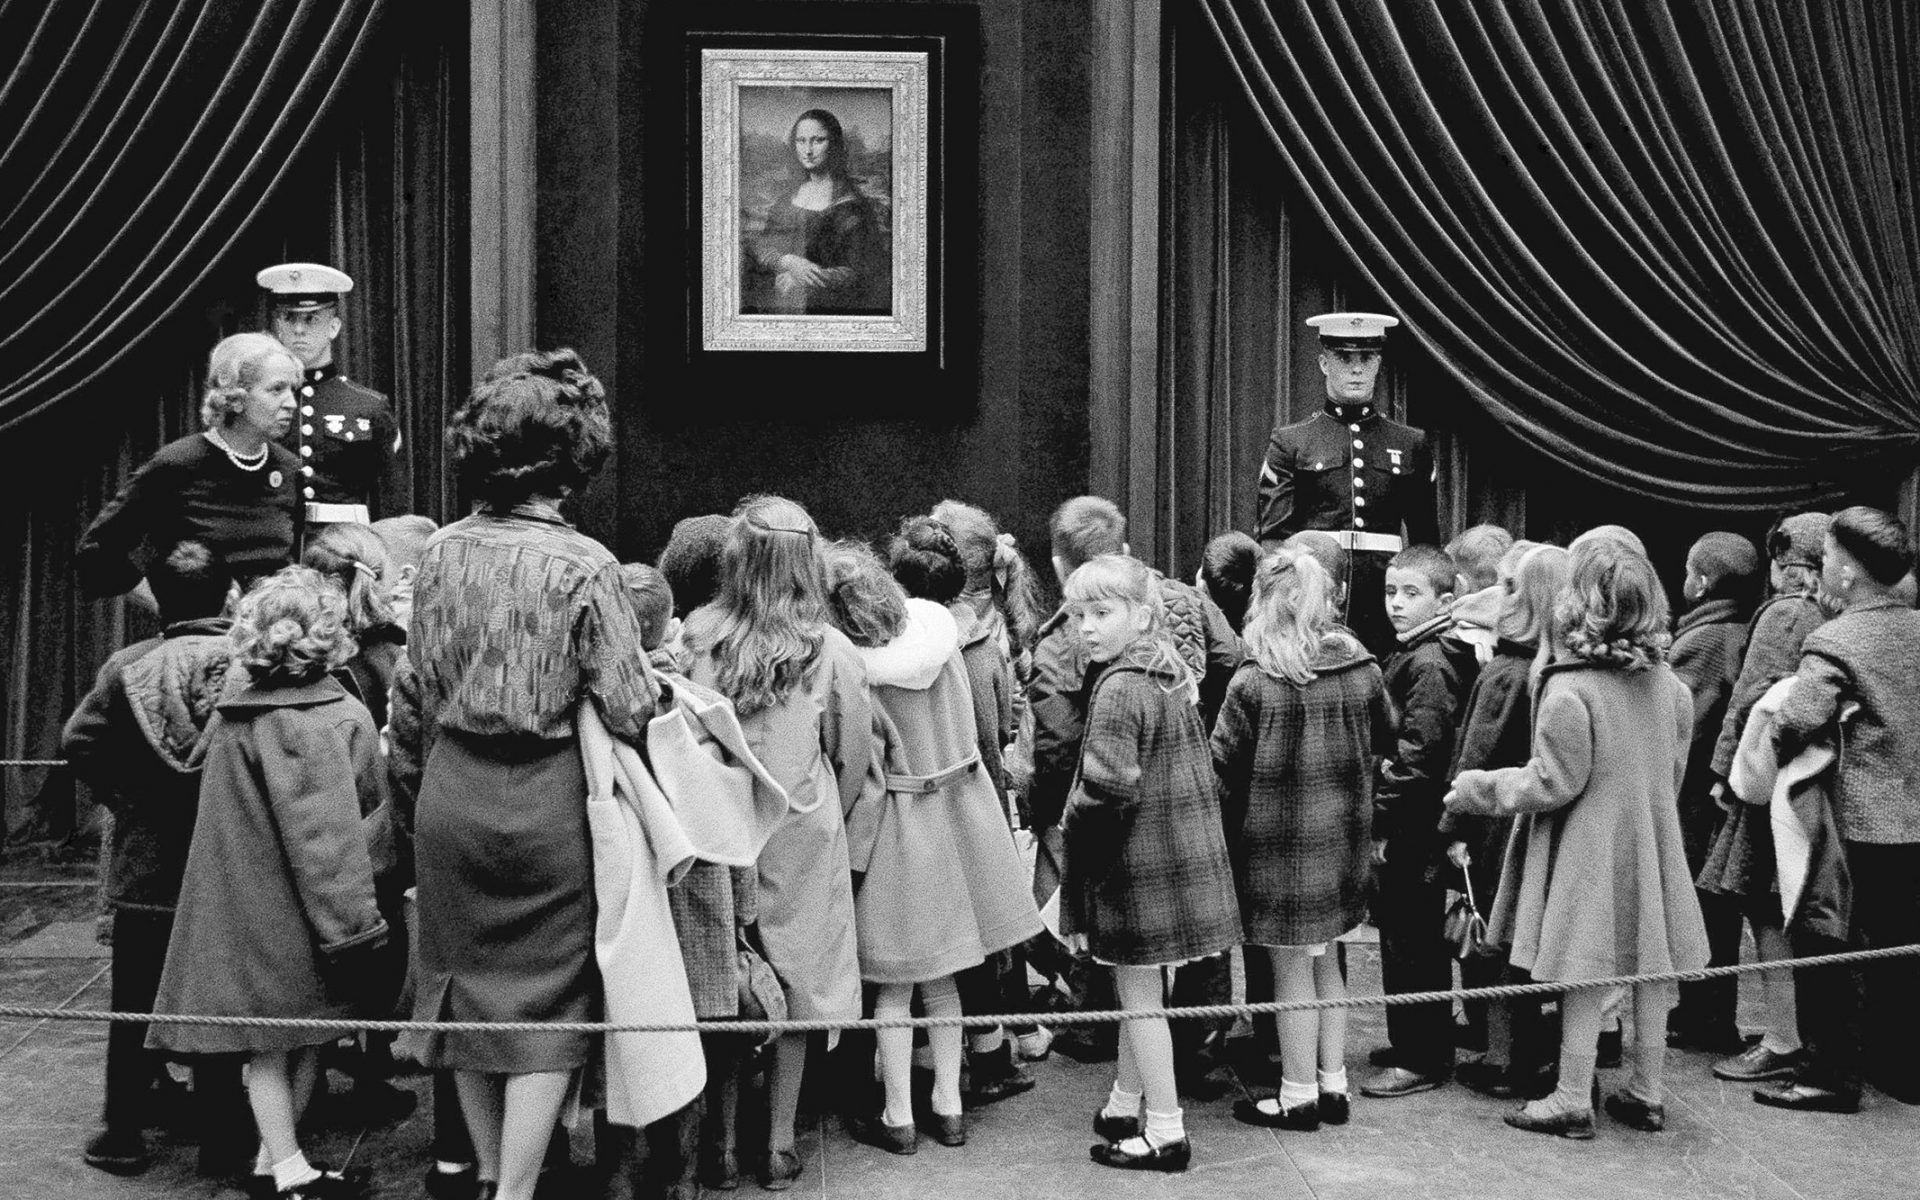  Young visitors crowd around the Mona Lisa during its visit to the National Gallery of Art in Washington.   Photo: AP Images.